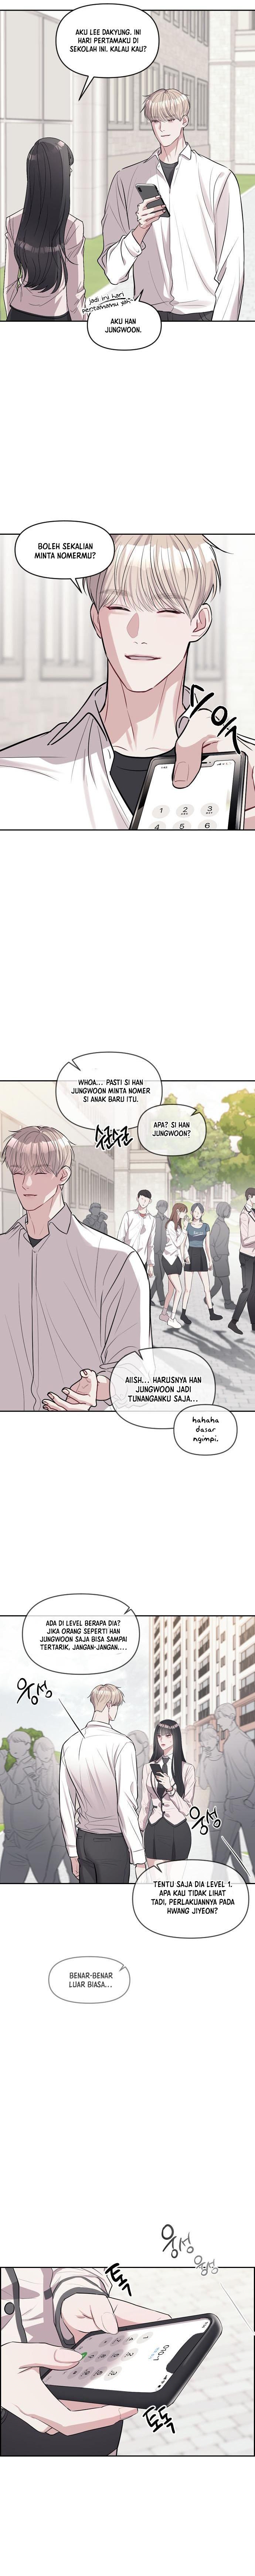 Undercover! Chaebol High School Chapter 2